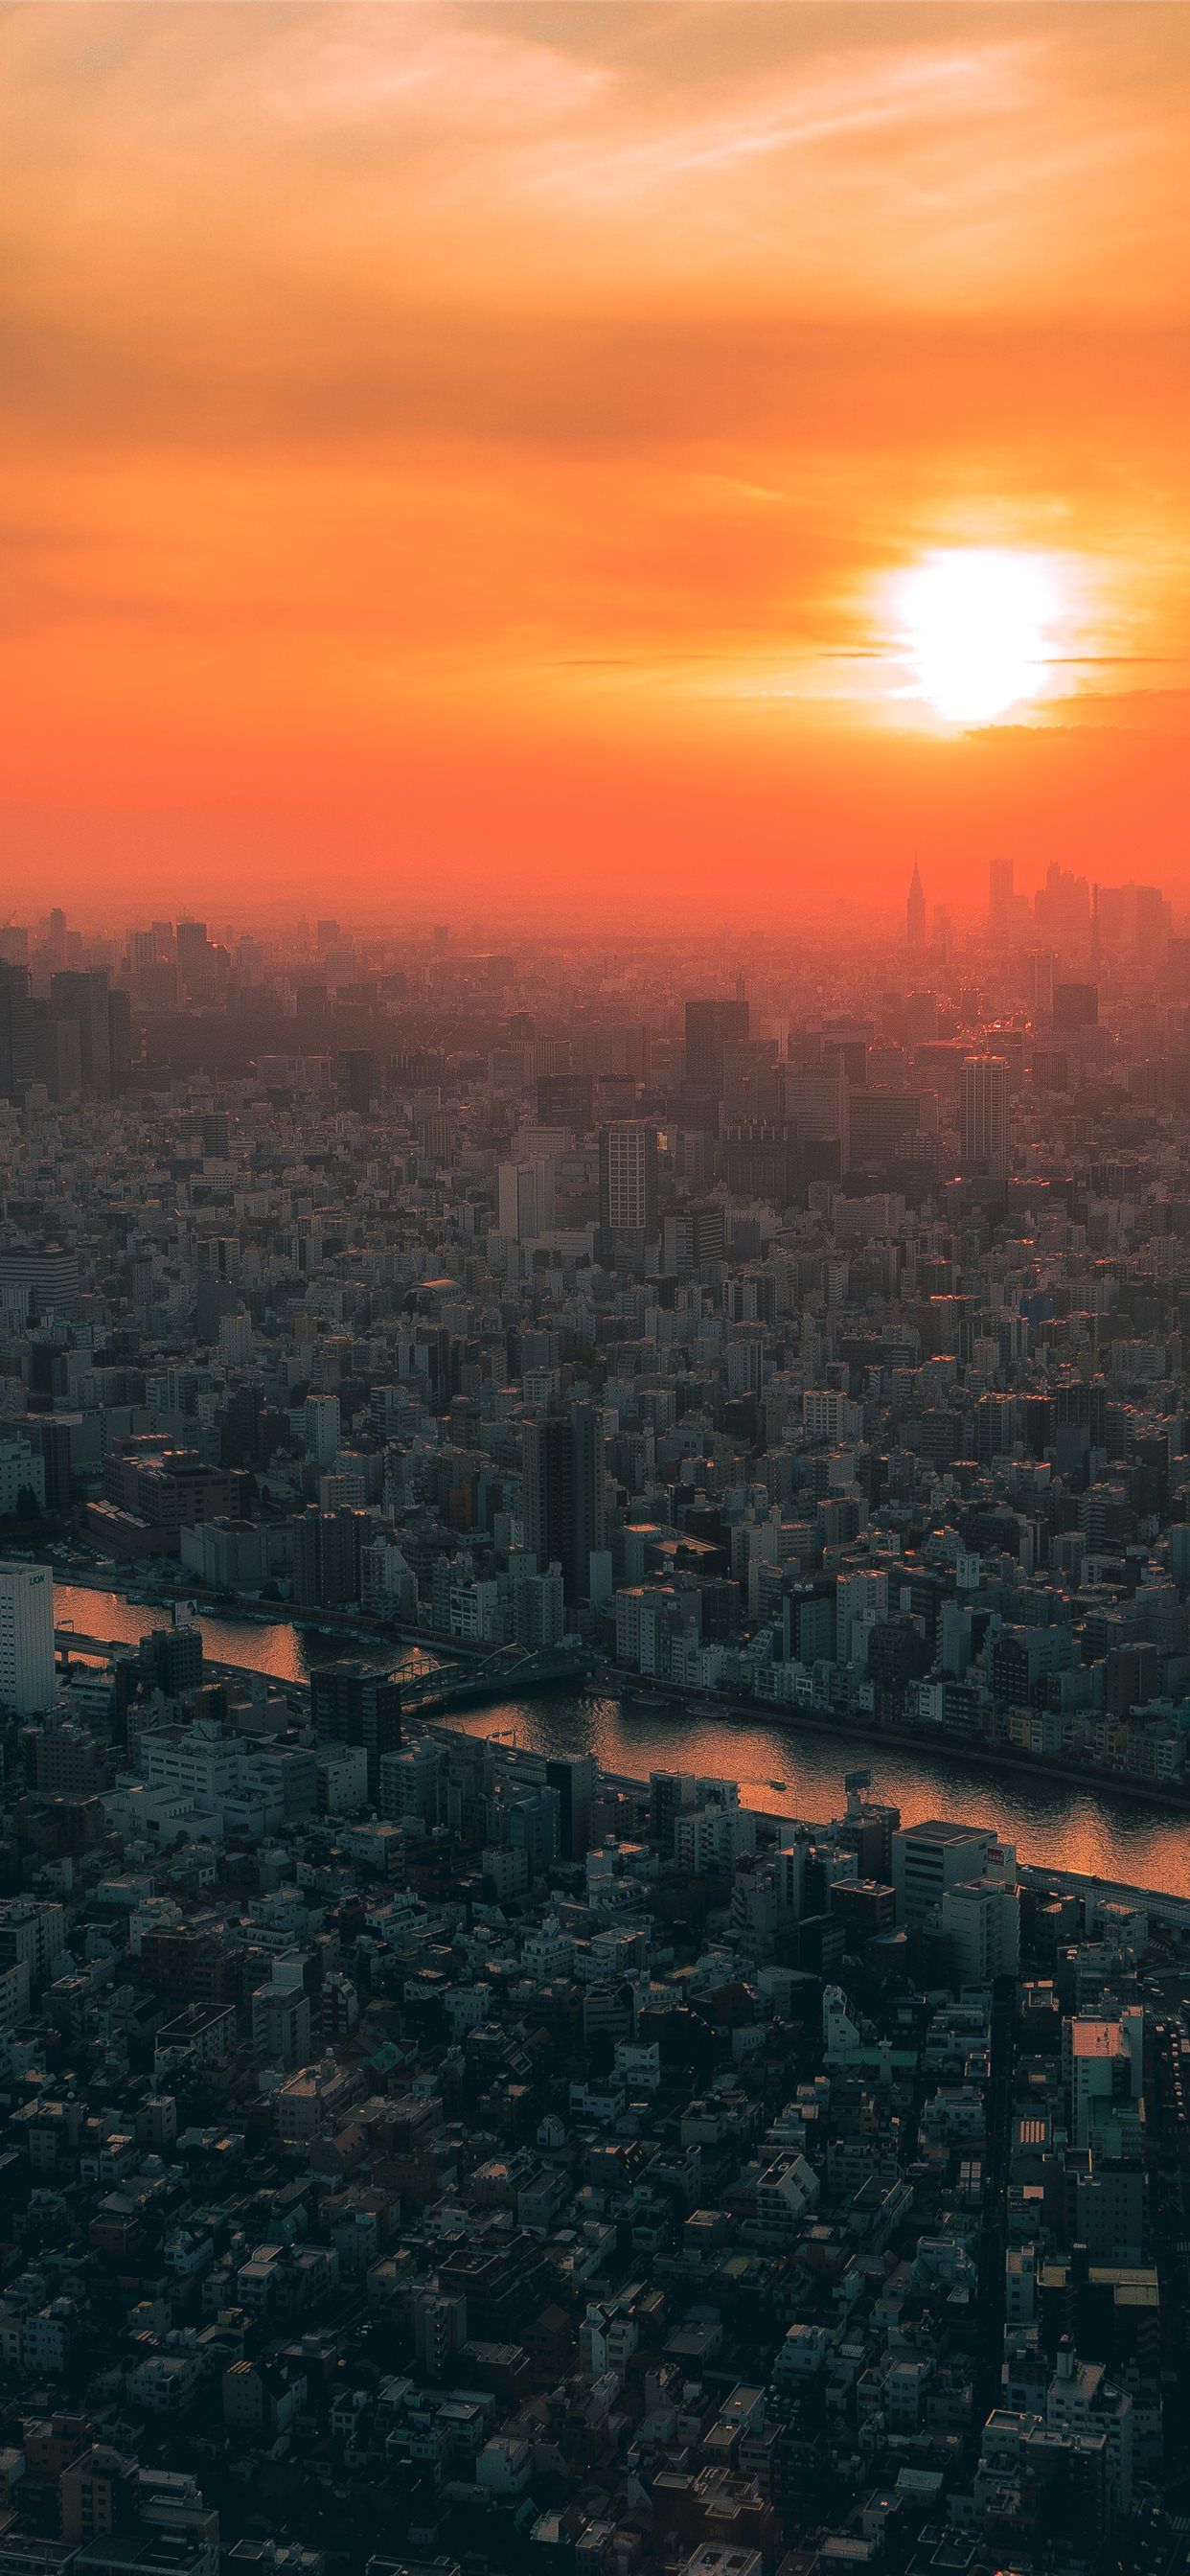 Tokyo cityscape with river during sunset - Photography